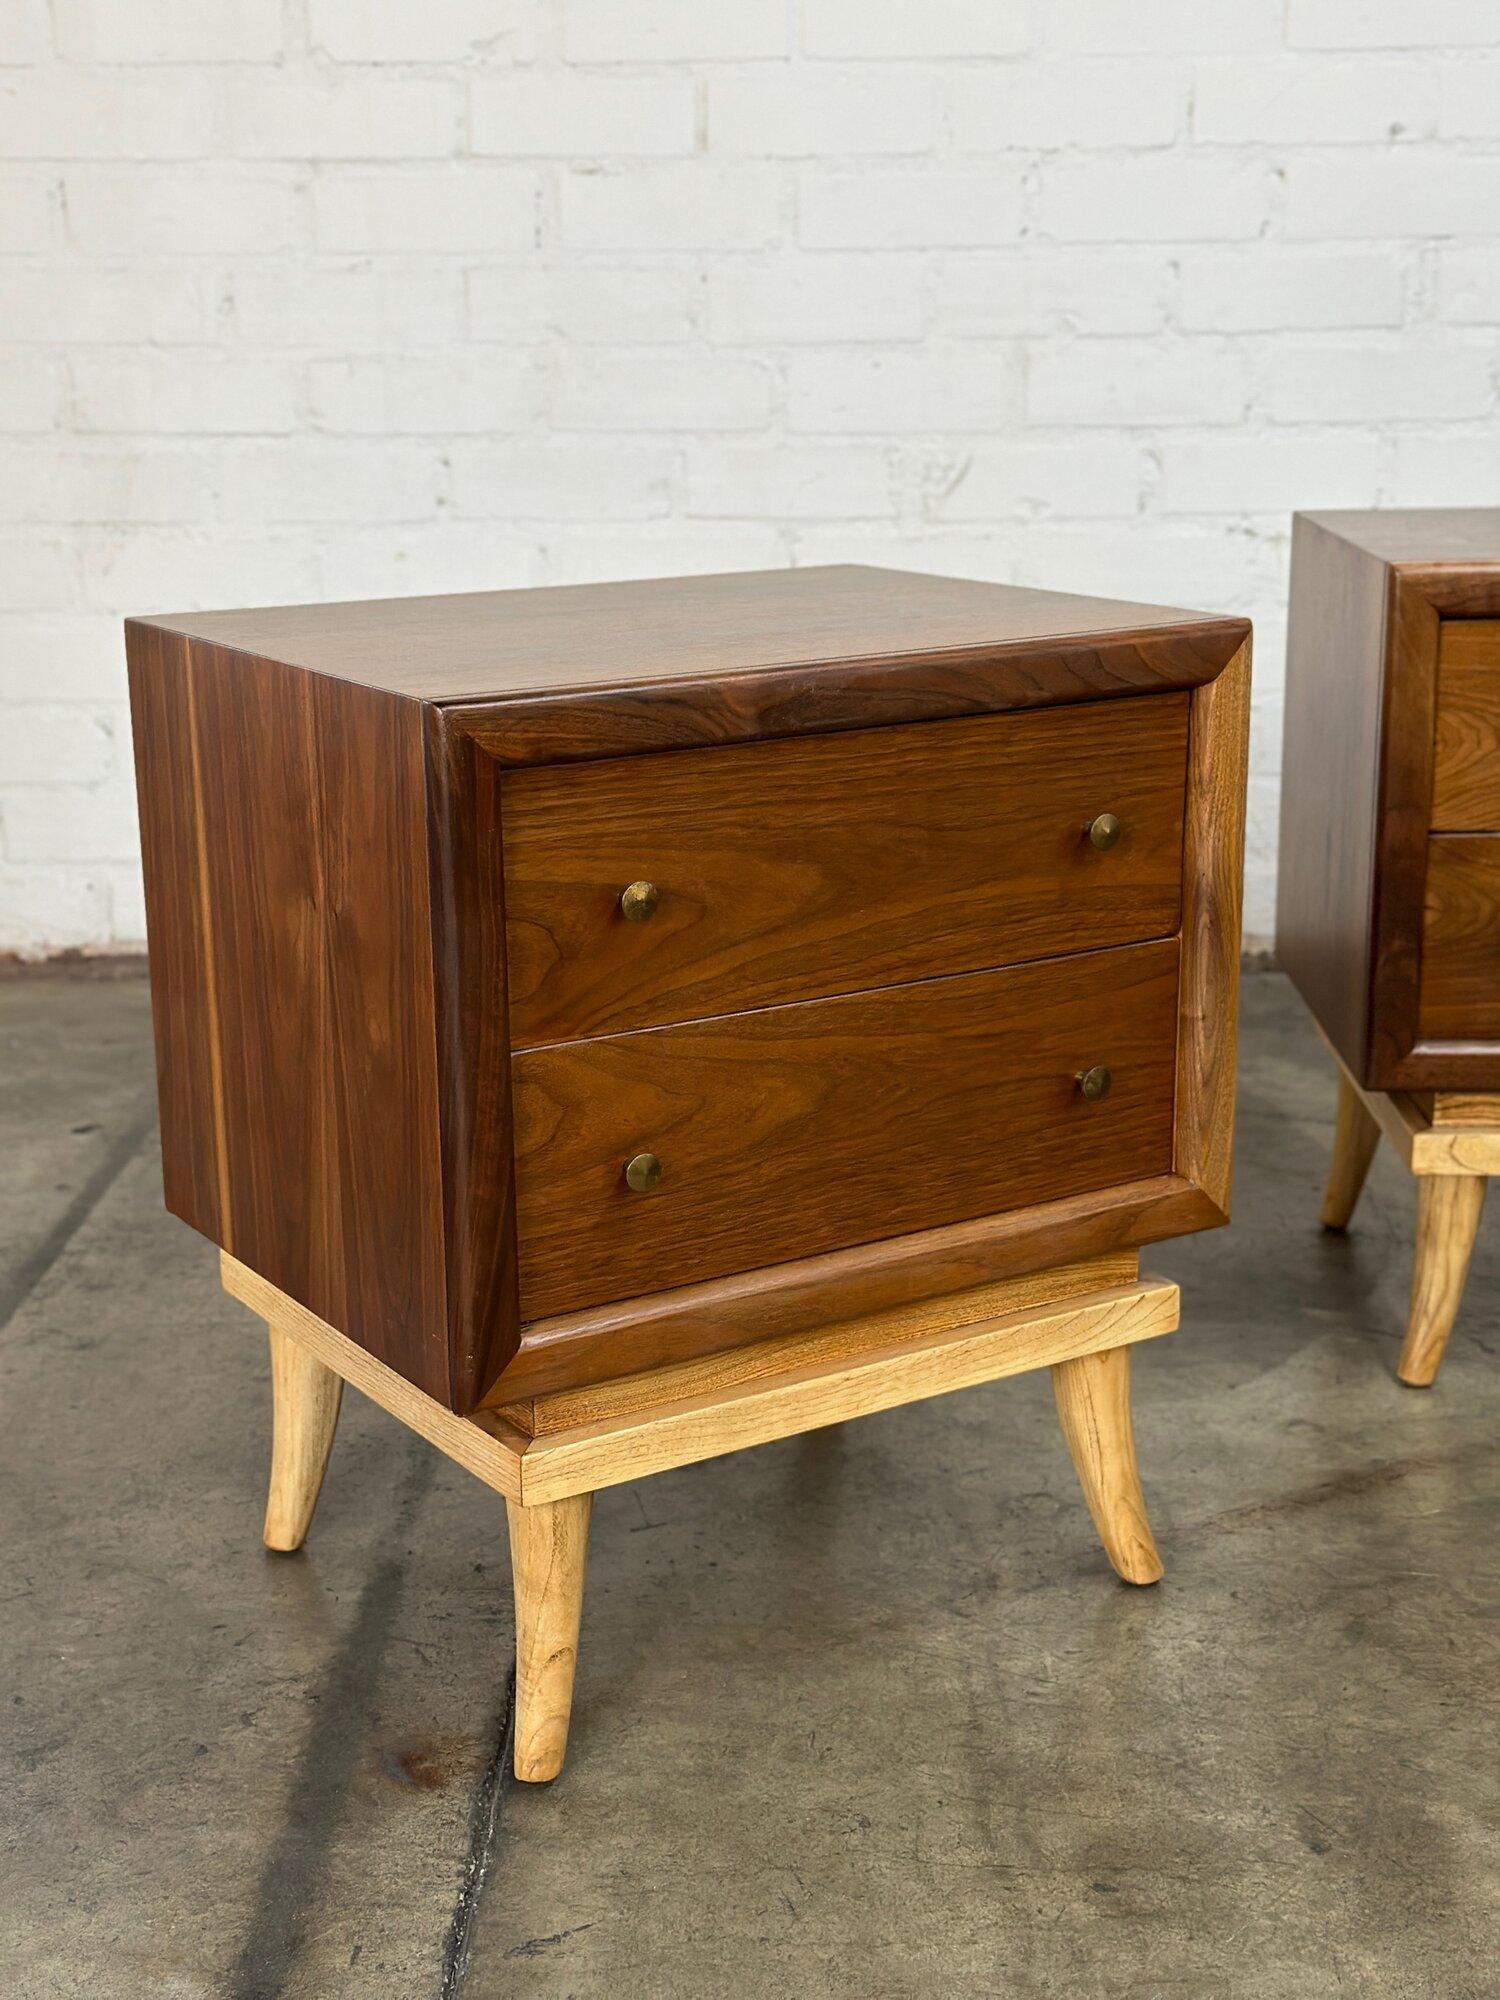 W22 D17 H25

1960’s Two toned Nightstands by American of Martinsville. Made out of Walnut and Oak with paginated brass hardware.

Price is for the pair*